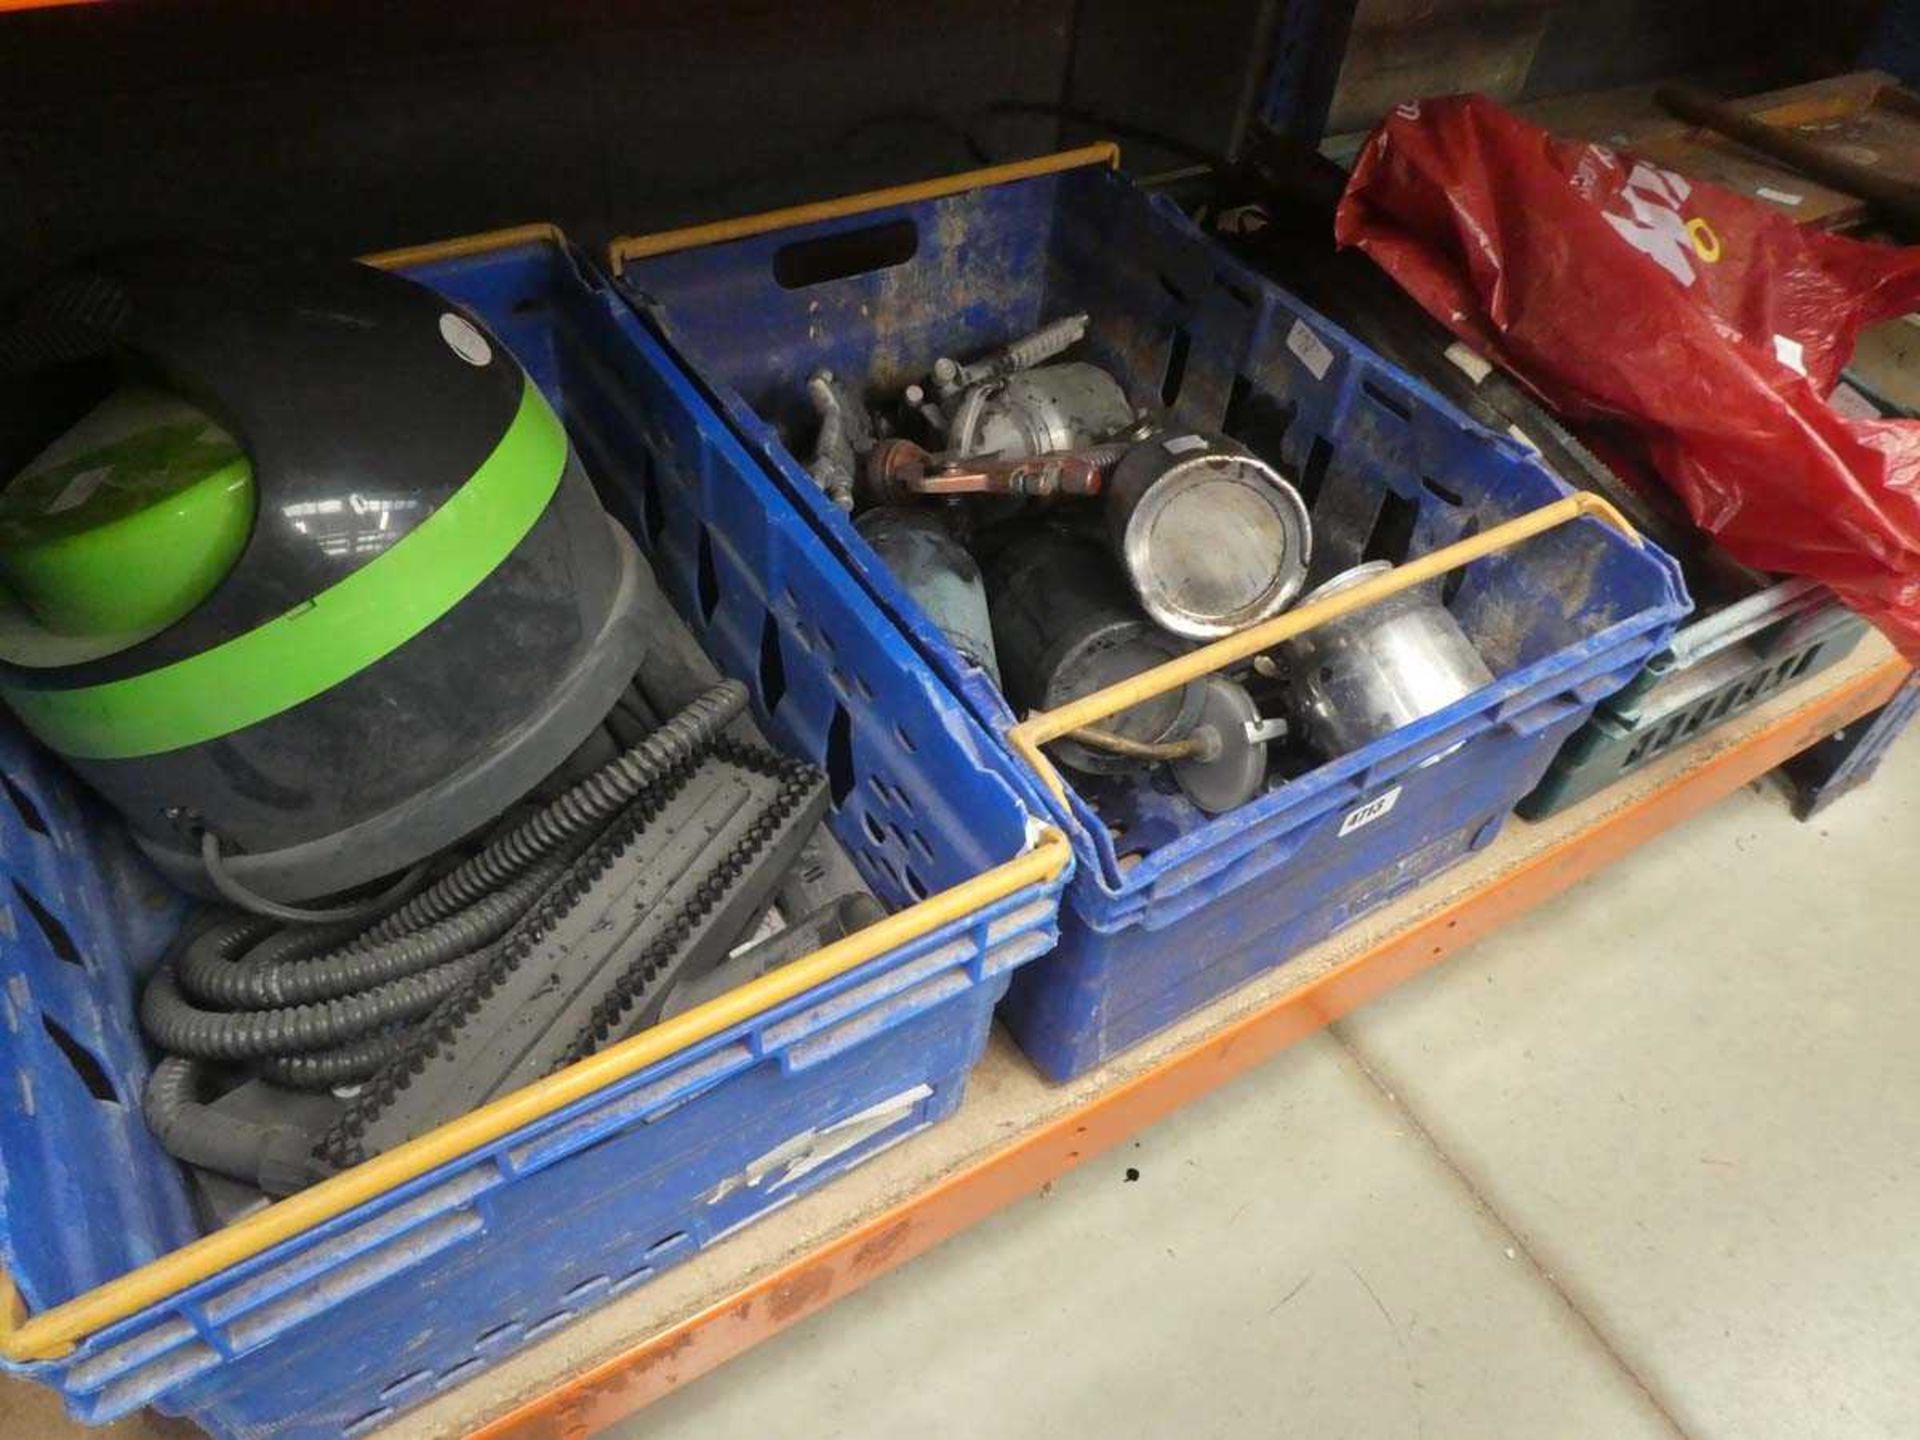 3 trays of paint sprayers, vacuum cleaner parts, circular saw blades and other tooling